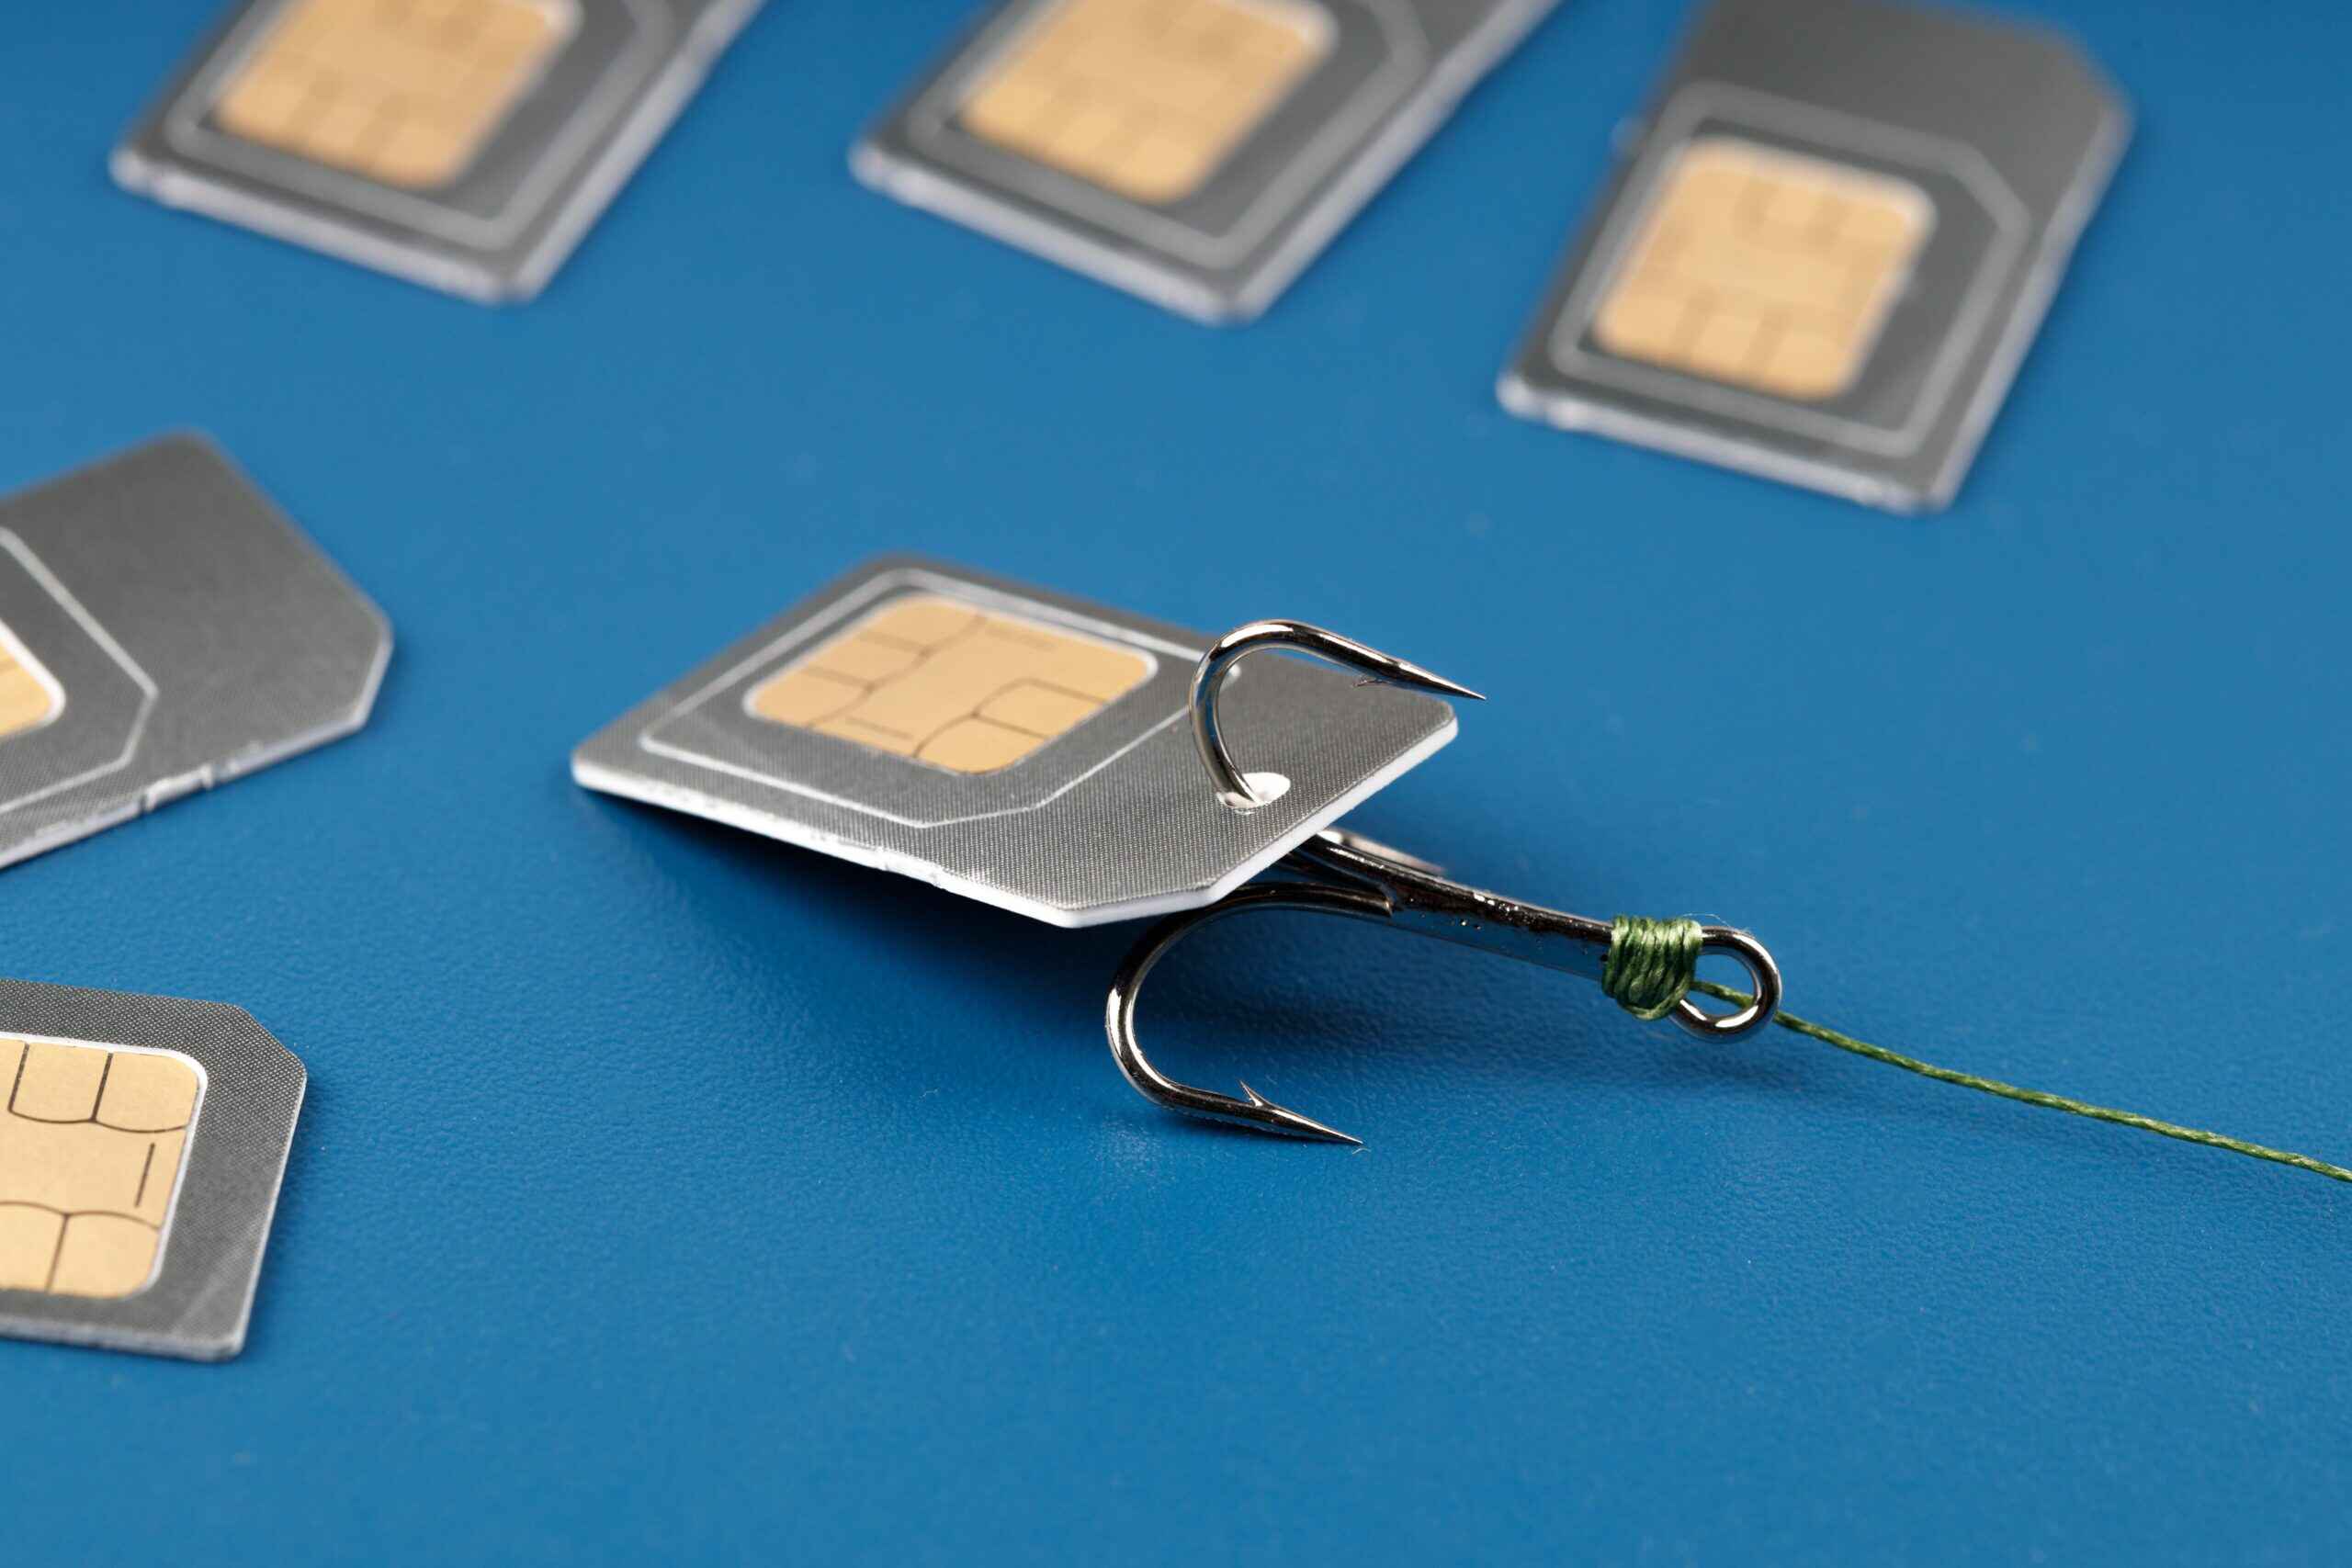 What To Do If You’ve Lost Your SIM Card